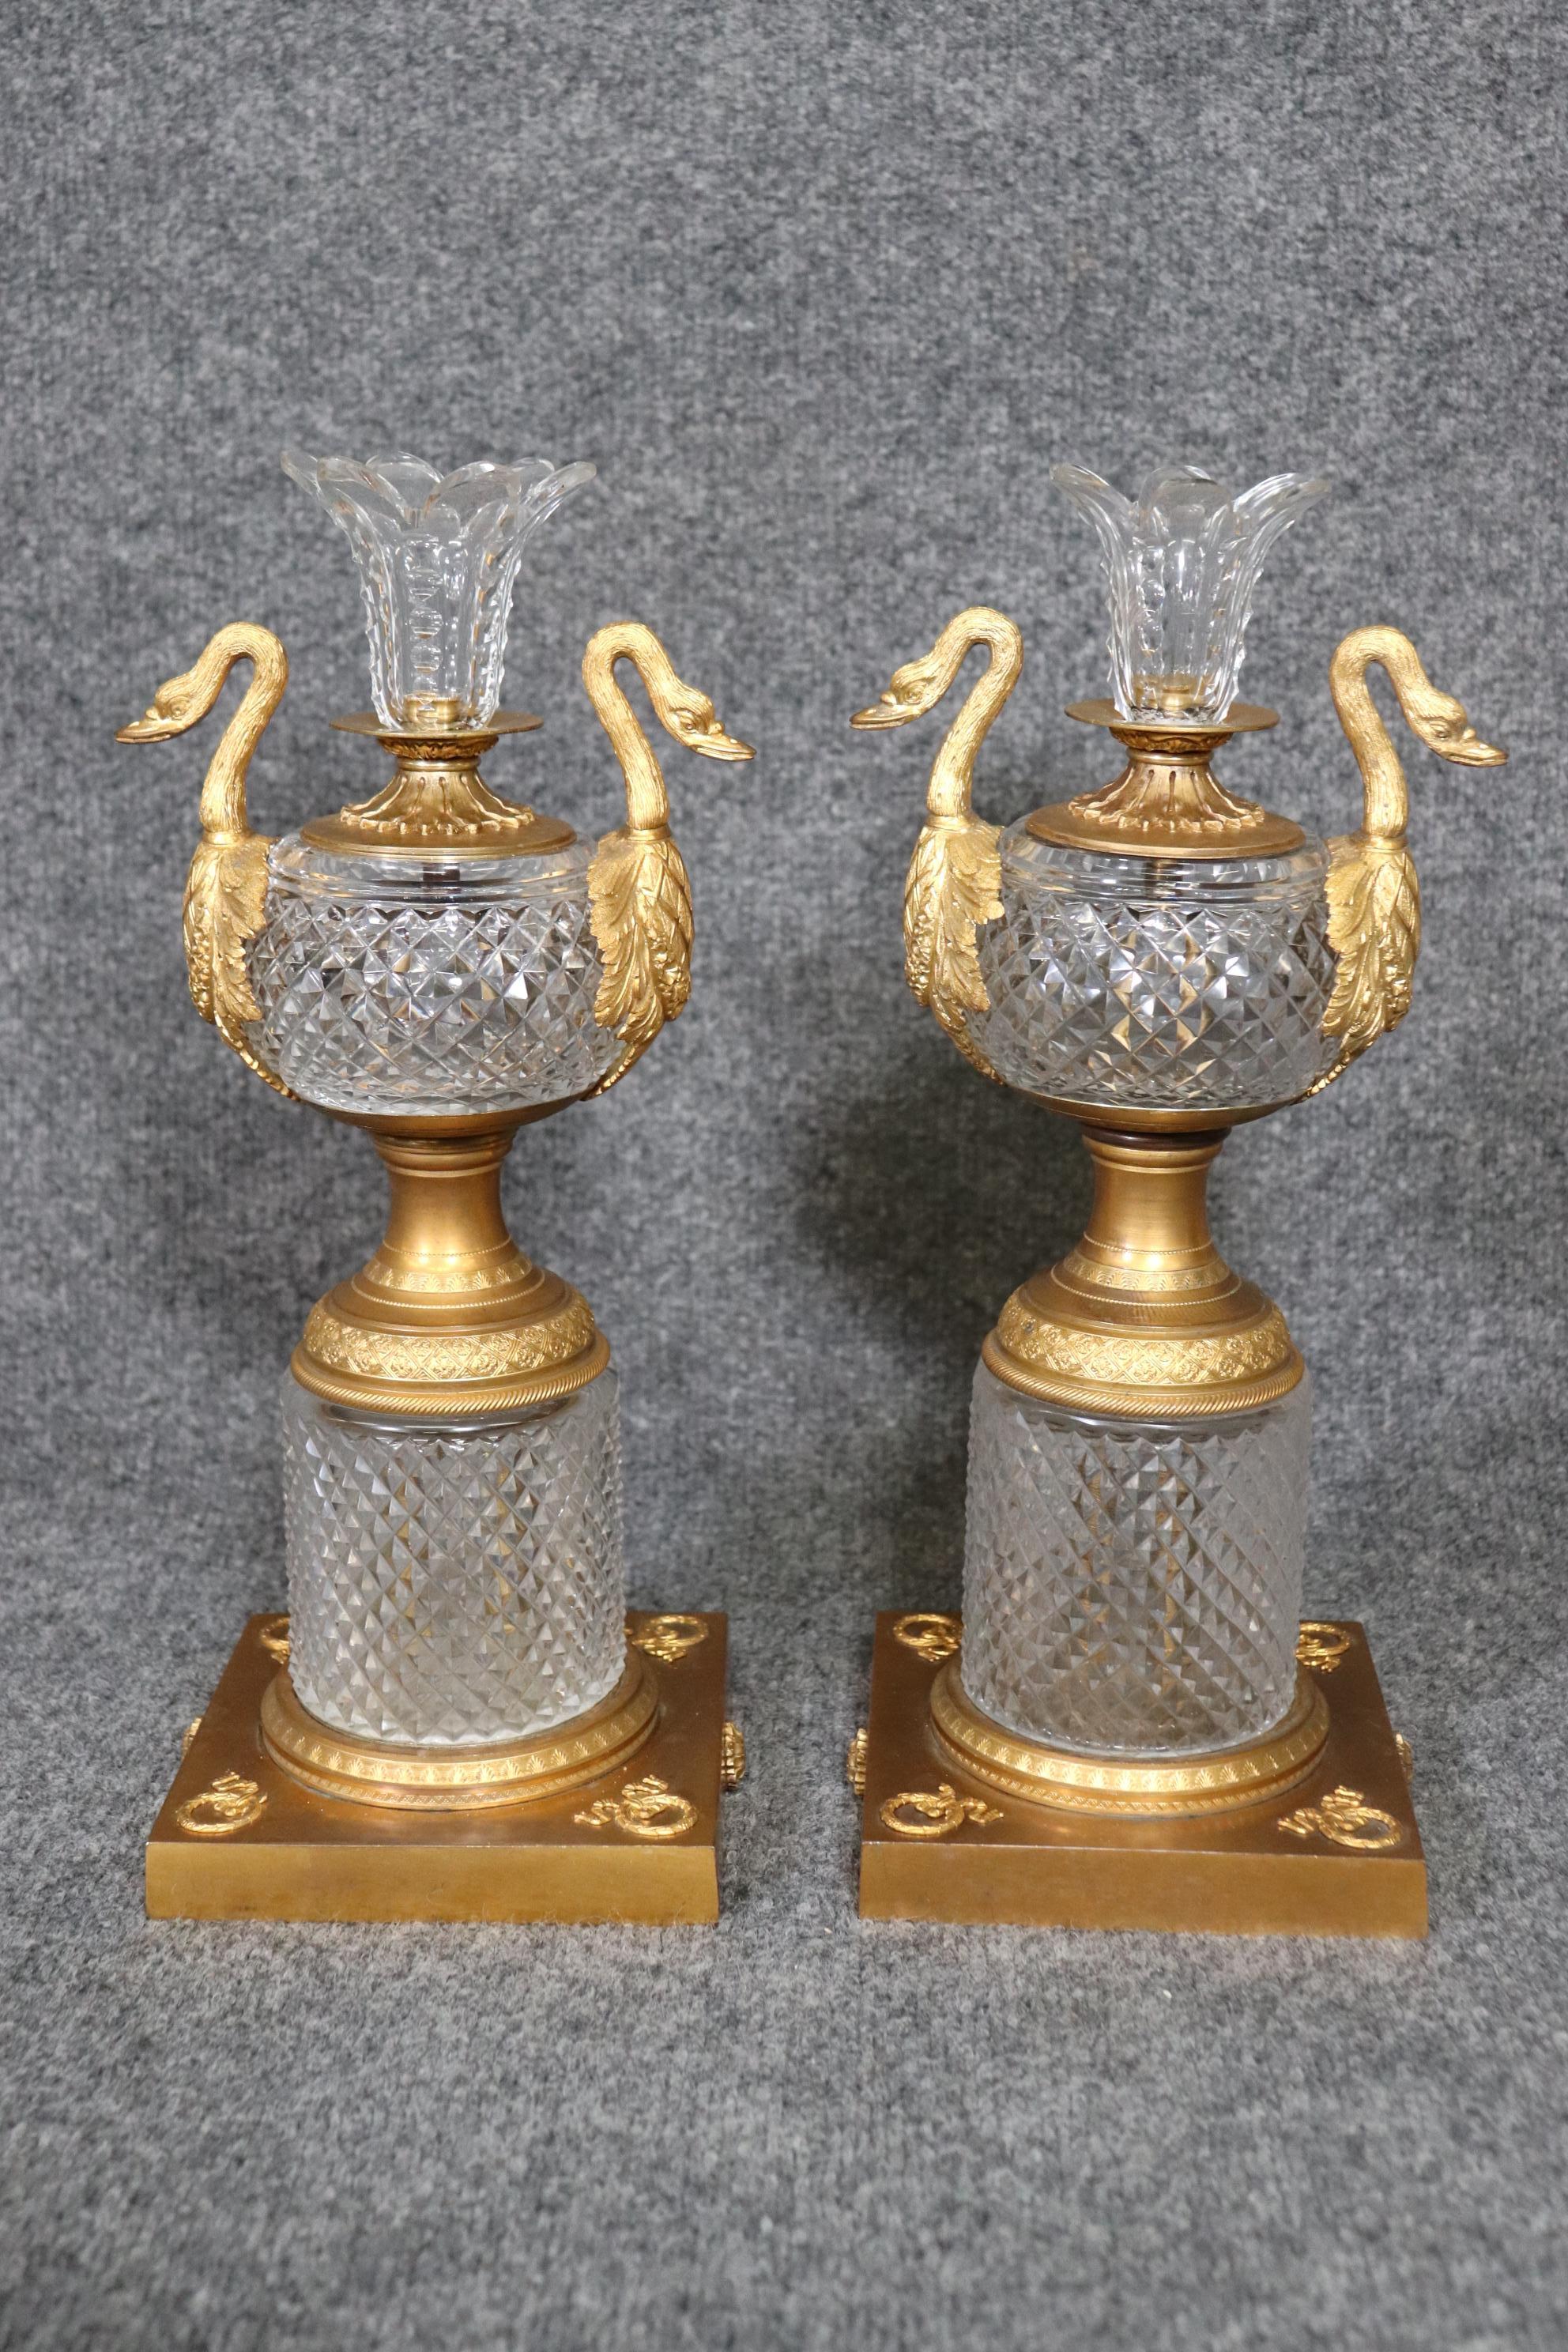 Exceptional Pair of Baccarat Quality Crystal Dore' Bronze Cassolettes with Swans 1